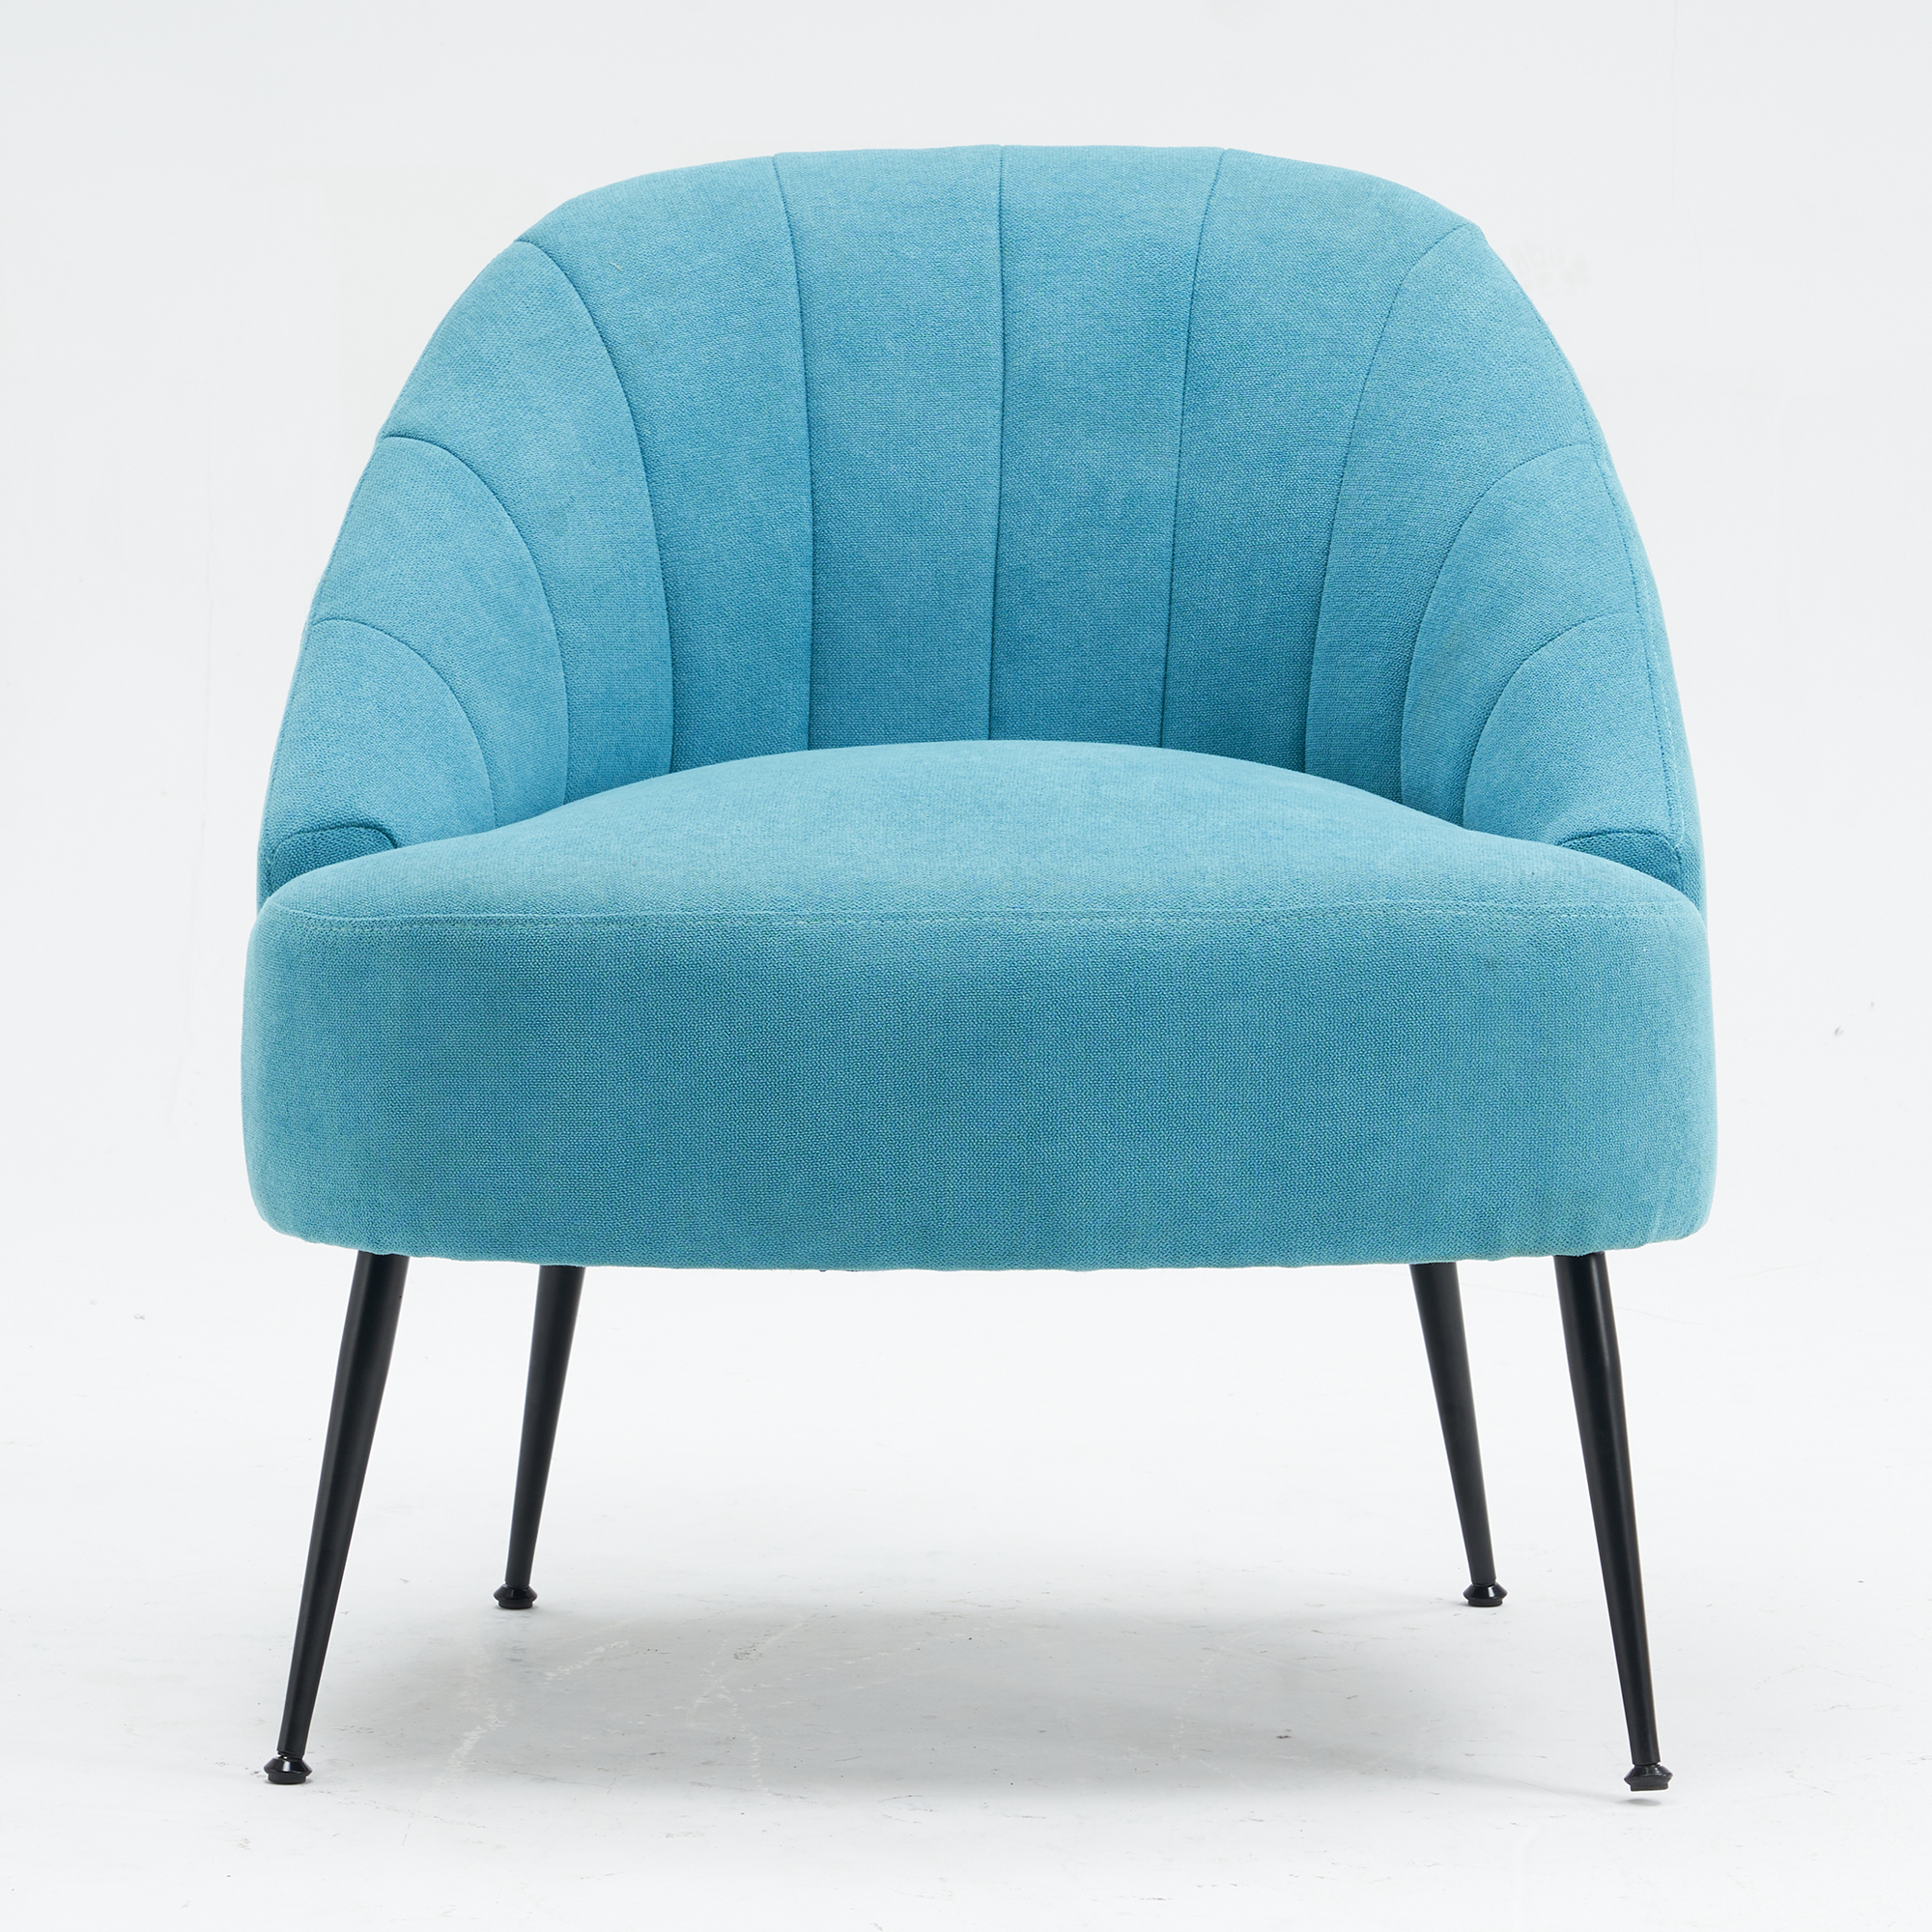 Light Blue Fabric accent chair with black metal legs for living room-CASAINC